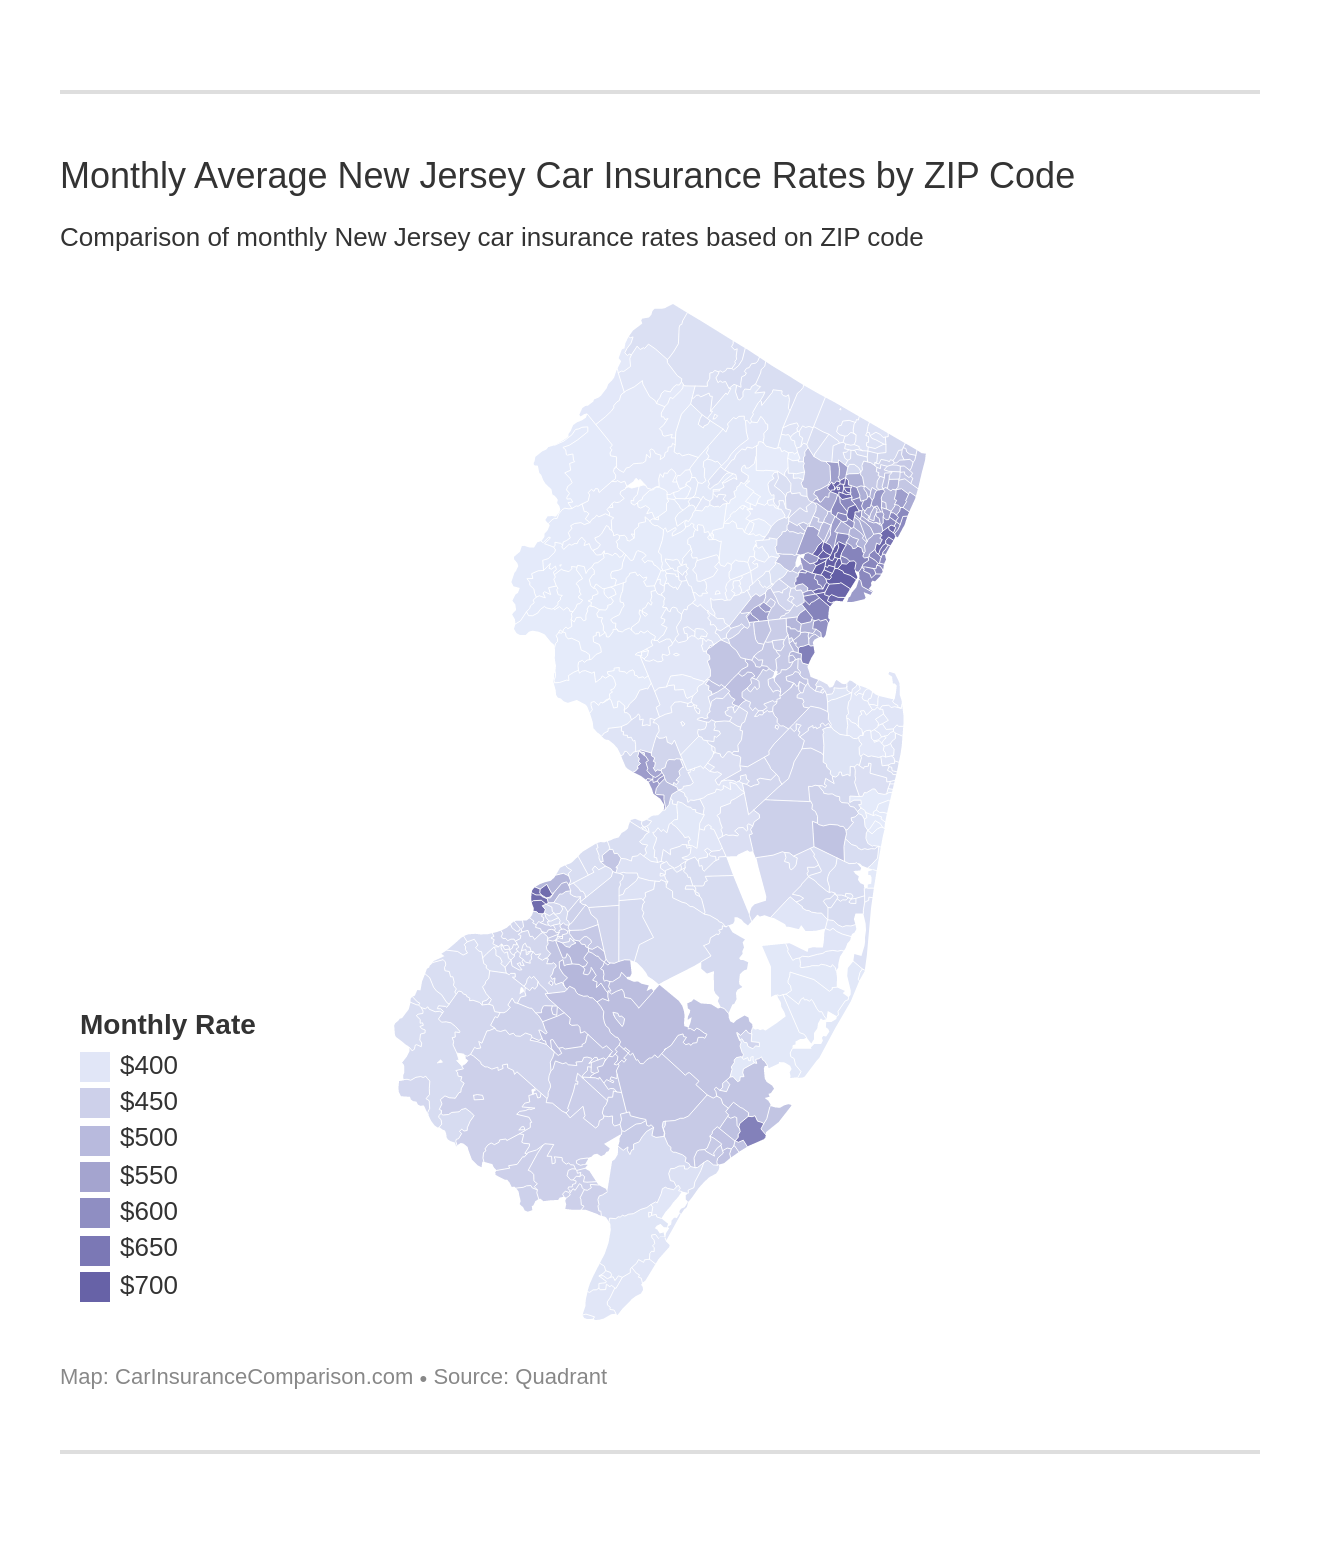 Monthly Average New Jersey Car Insurance Rates by ZIP Code